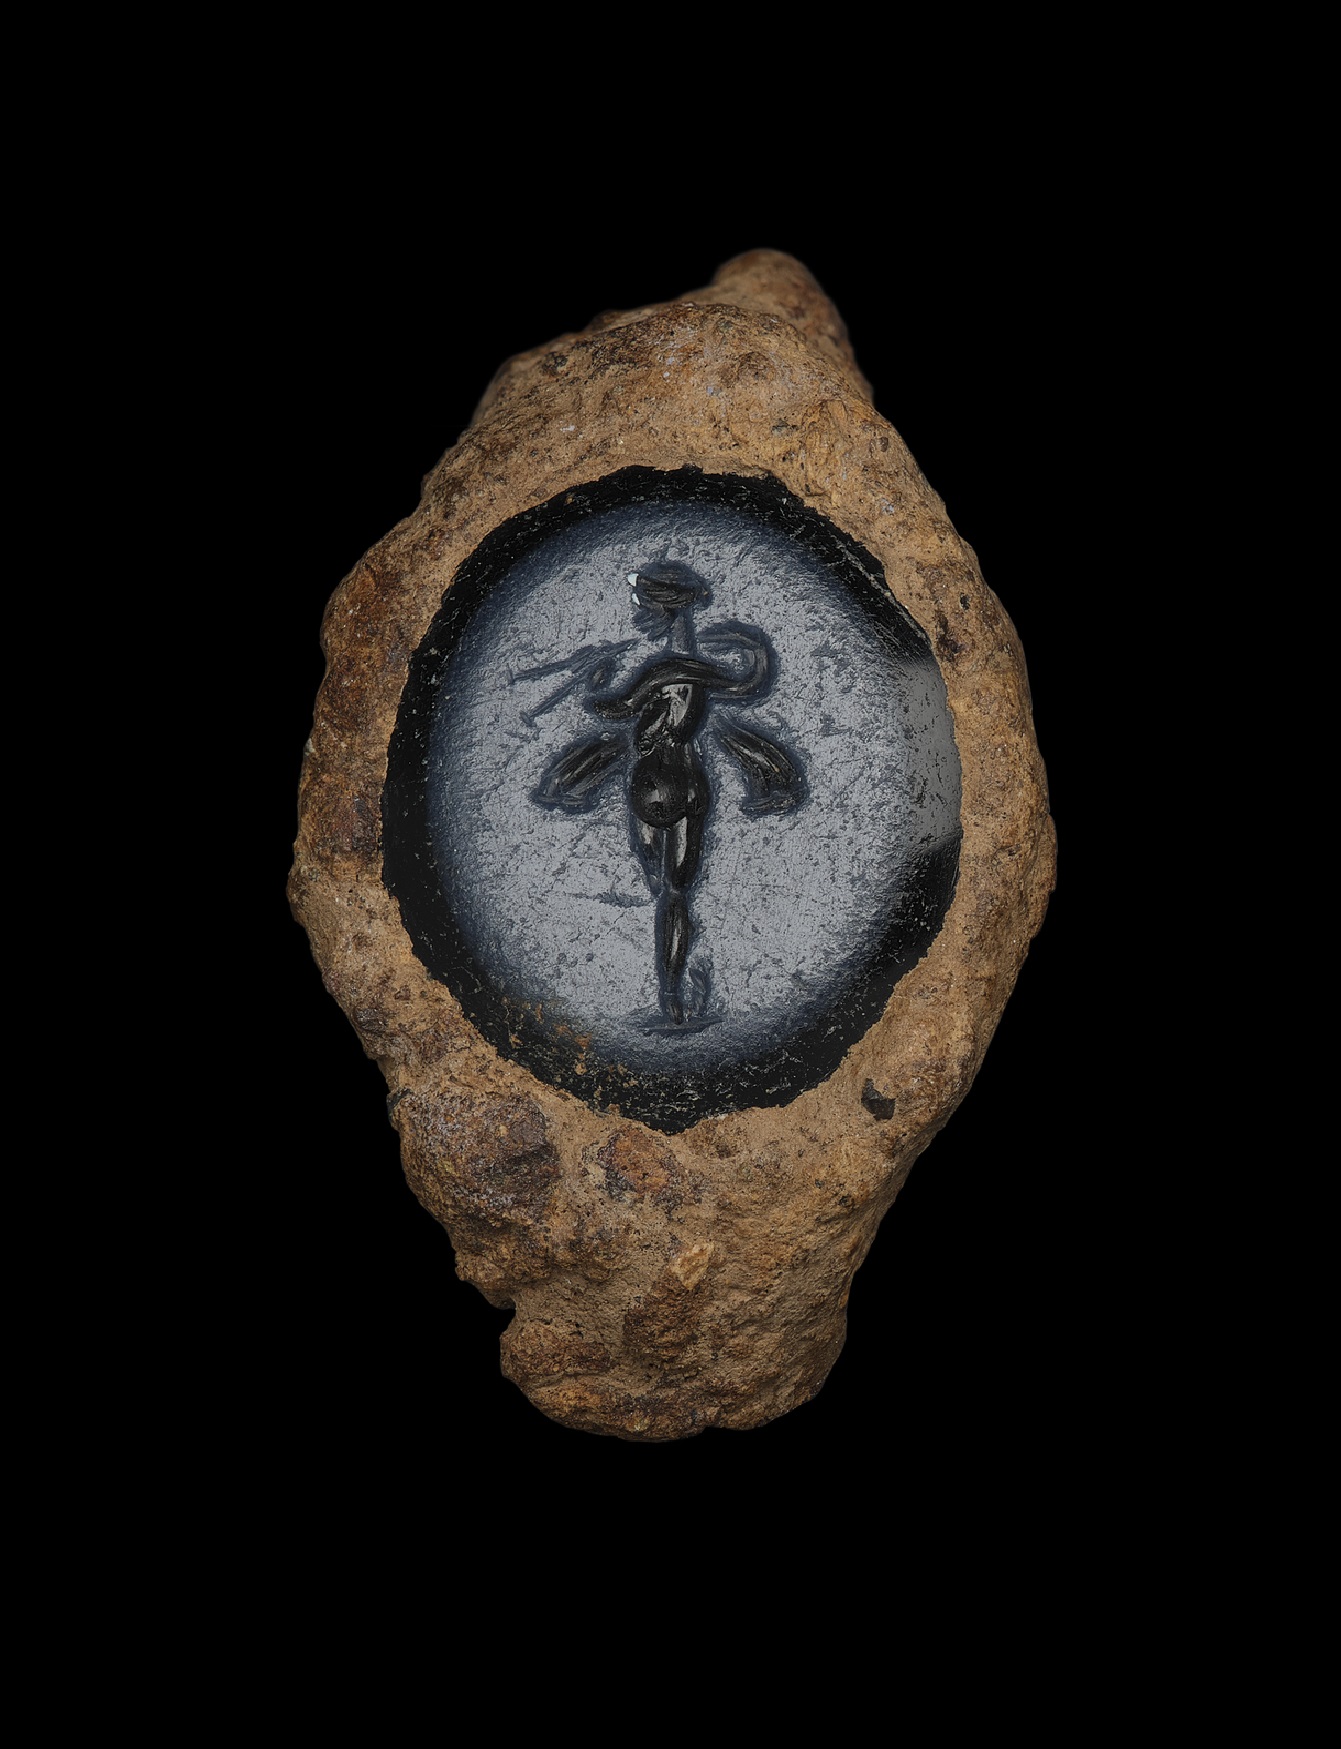 Within a heavily rusted ring-like setting is a tiny portrait of a goddess, standing upright and nude with what looks like wings. She stands within a pale blue area ringed by dark blue.